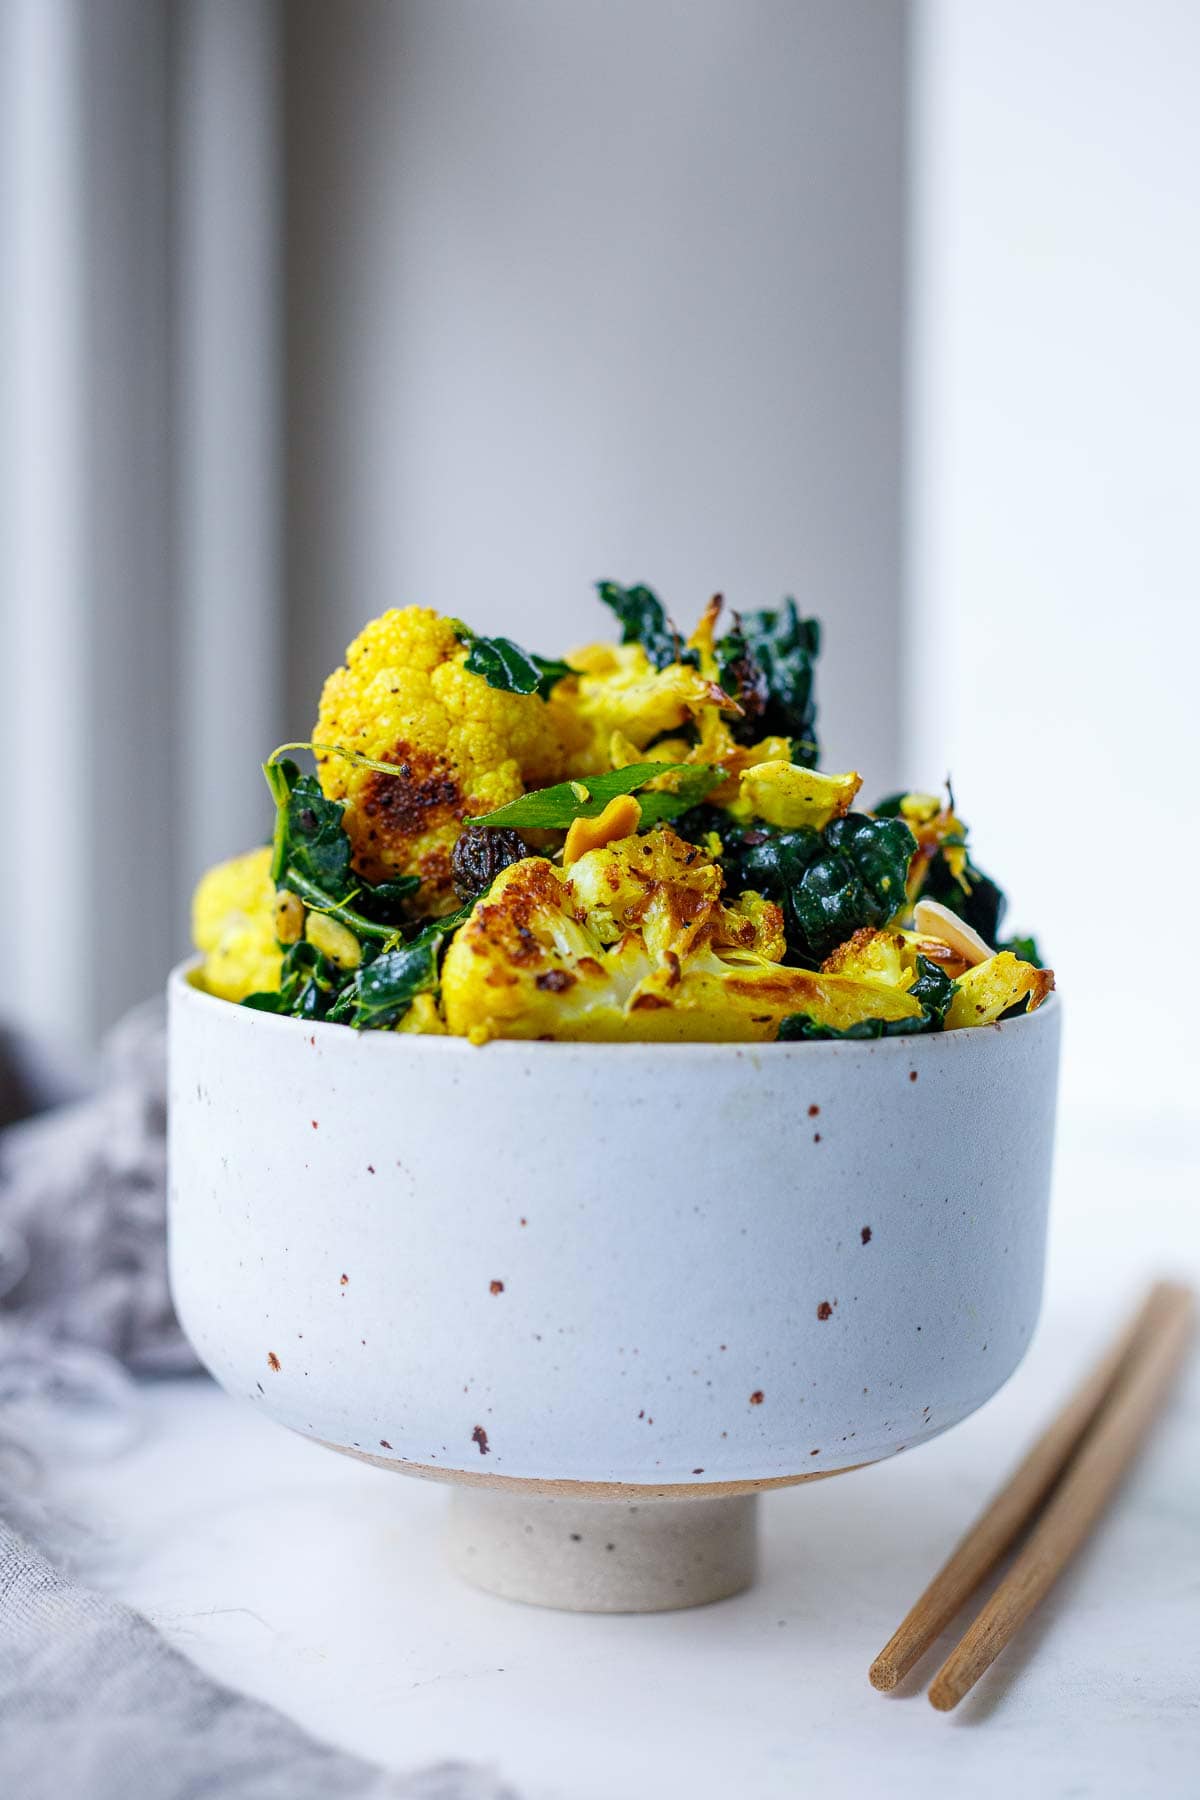 This Roasted Cauliflower Salad recipe is incredibly flavorful. Cauliflower is roasted until tender-crisp, then tossed with farro, lacinato kale, scallions, raisins, and toasty almonds in a savory-sweet turmeric dressing. Vegan. 